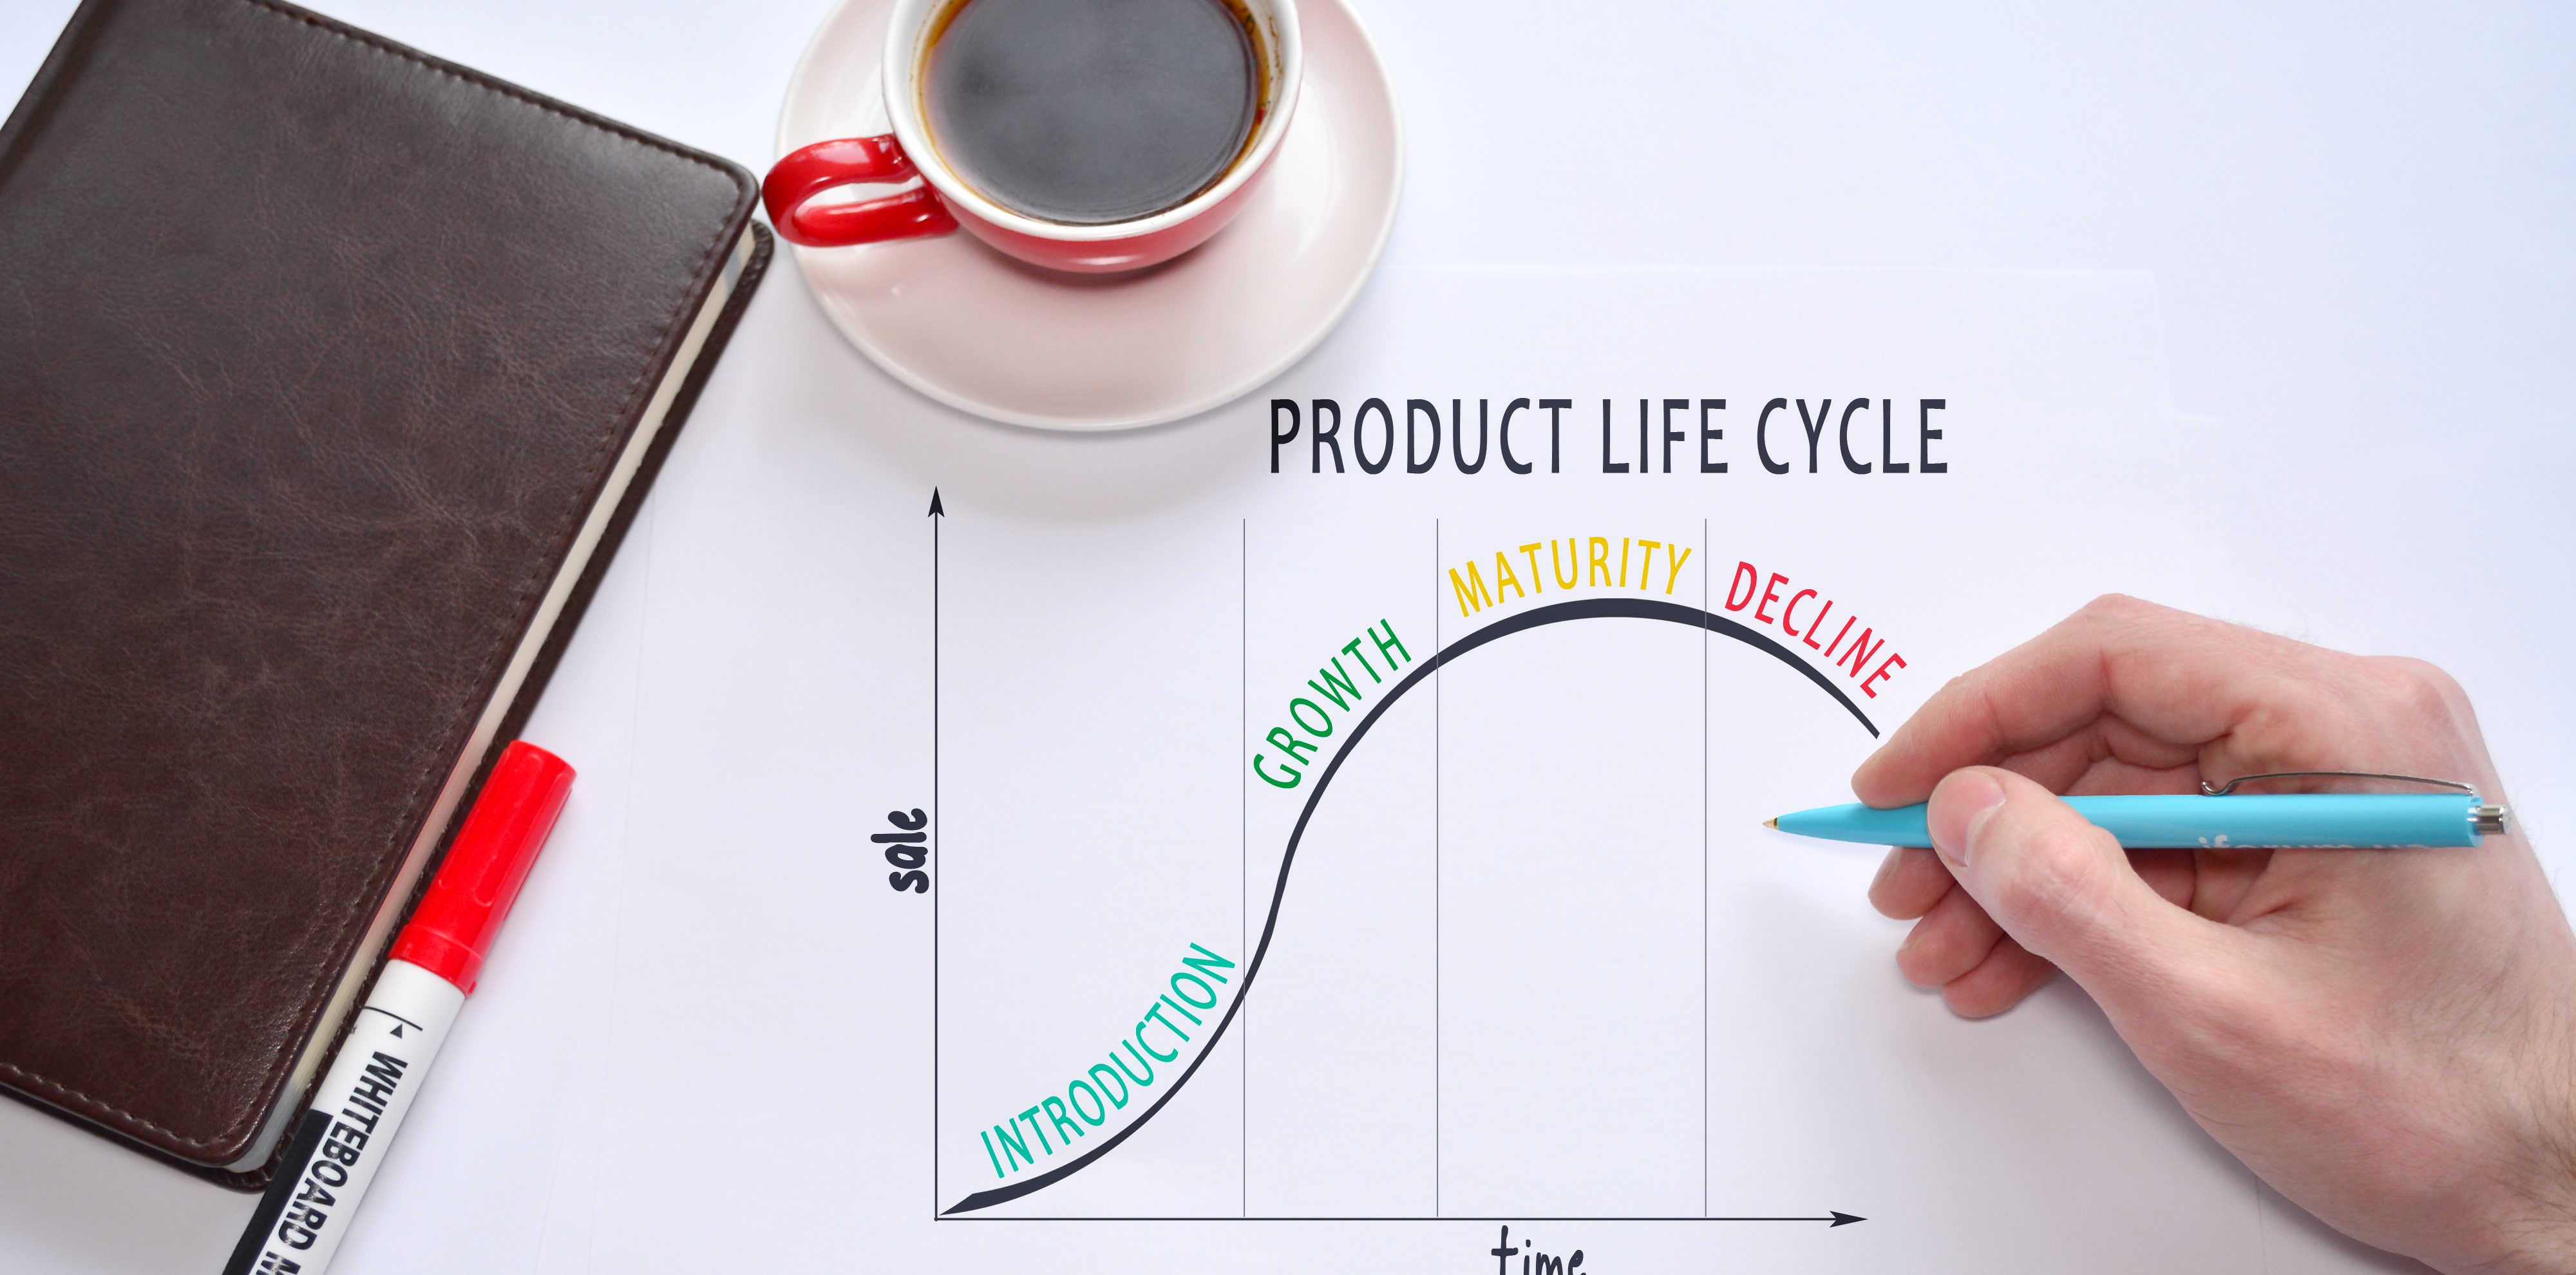 Product life cycle model in chart form